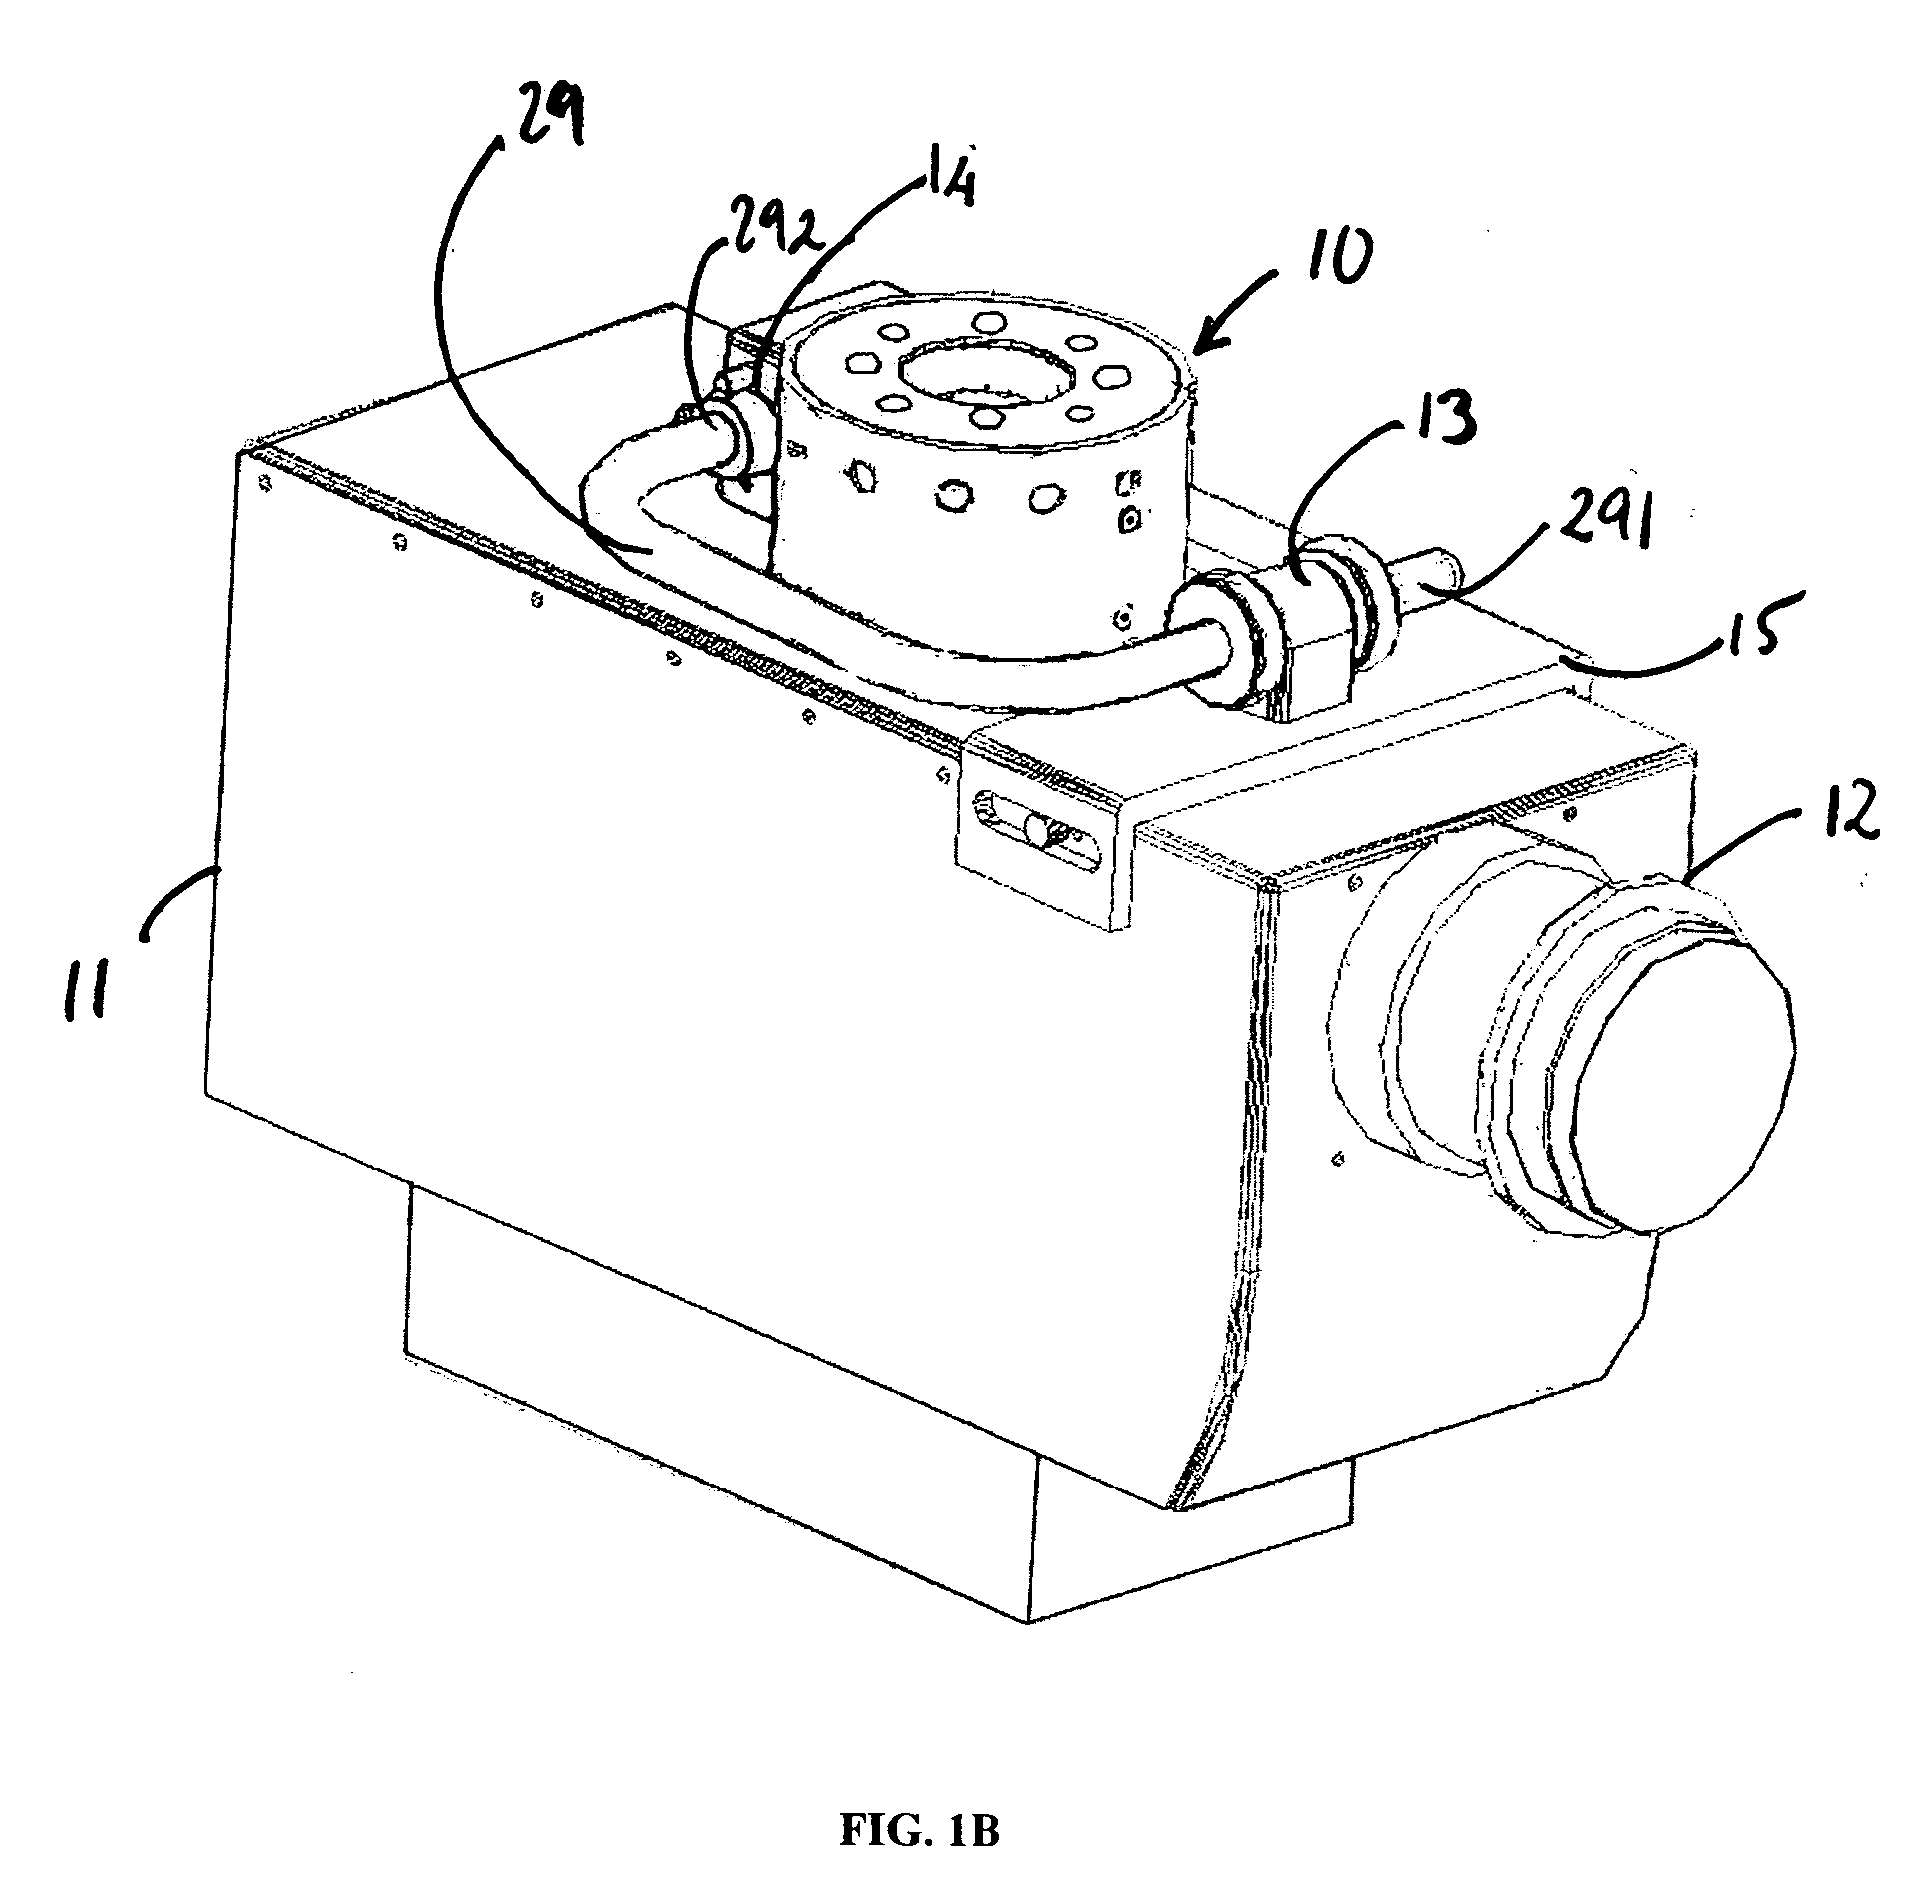 Integrated black body and lens cap assembly and methods for calibration of infrared cameras using same